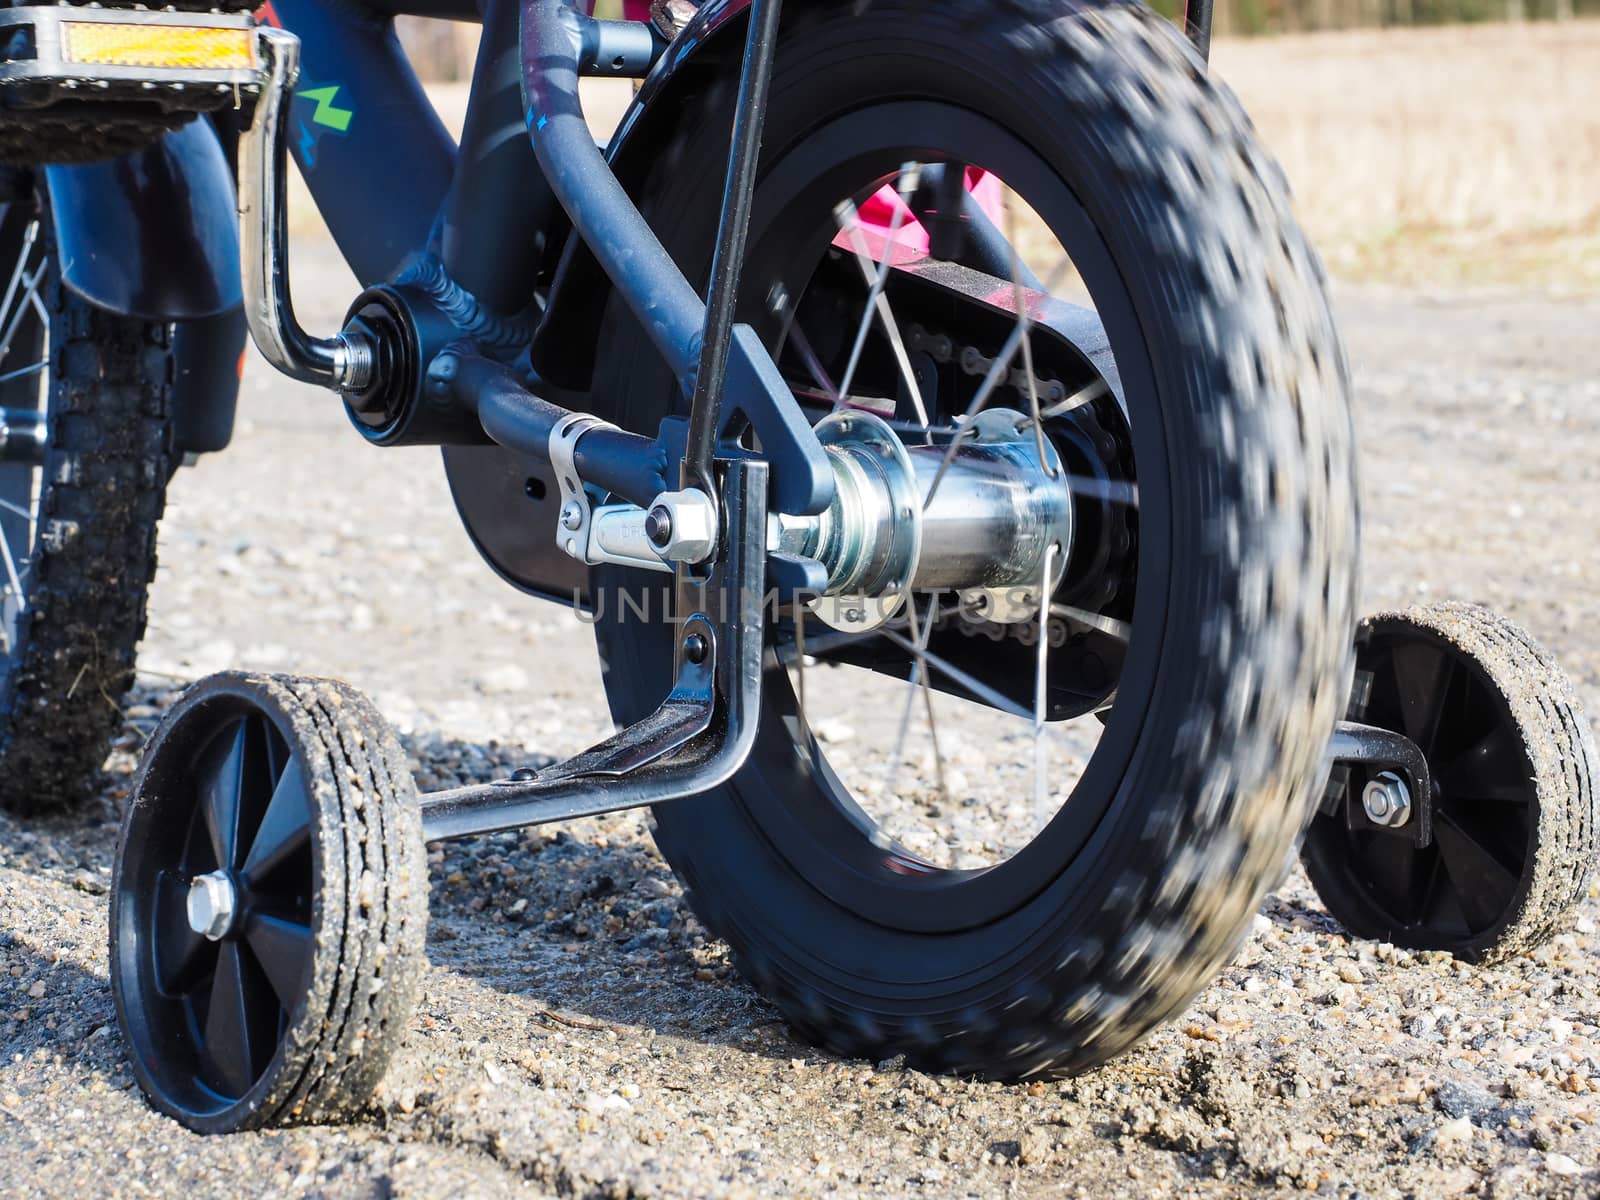 Bicycle with supporting wheels stuck in loose gravel by Arvebettum